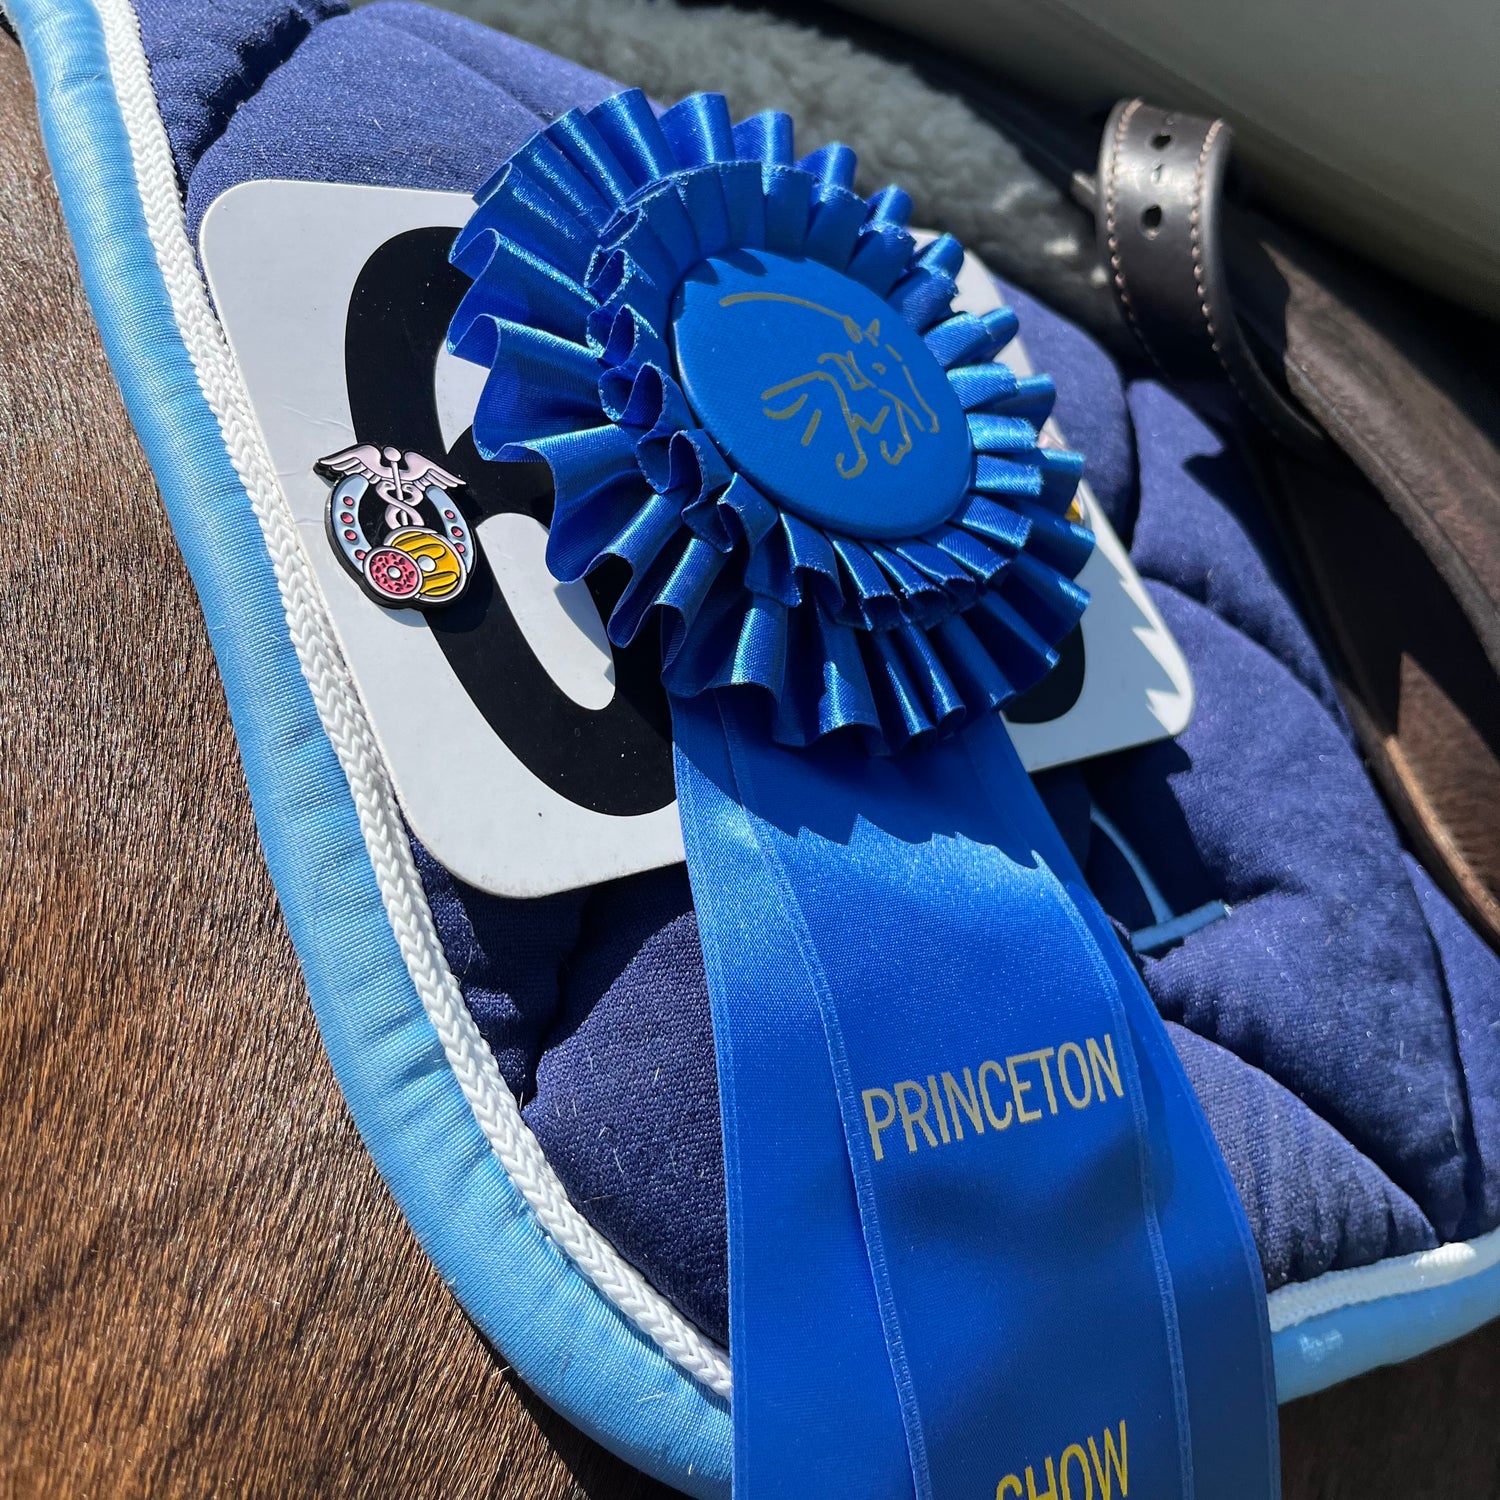 pinsnickety custom horse show number pins, featuring a horse shoe and donuts, on a saddle pad with a blue ribbon